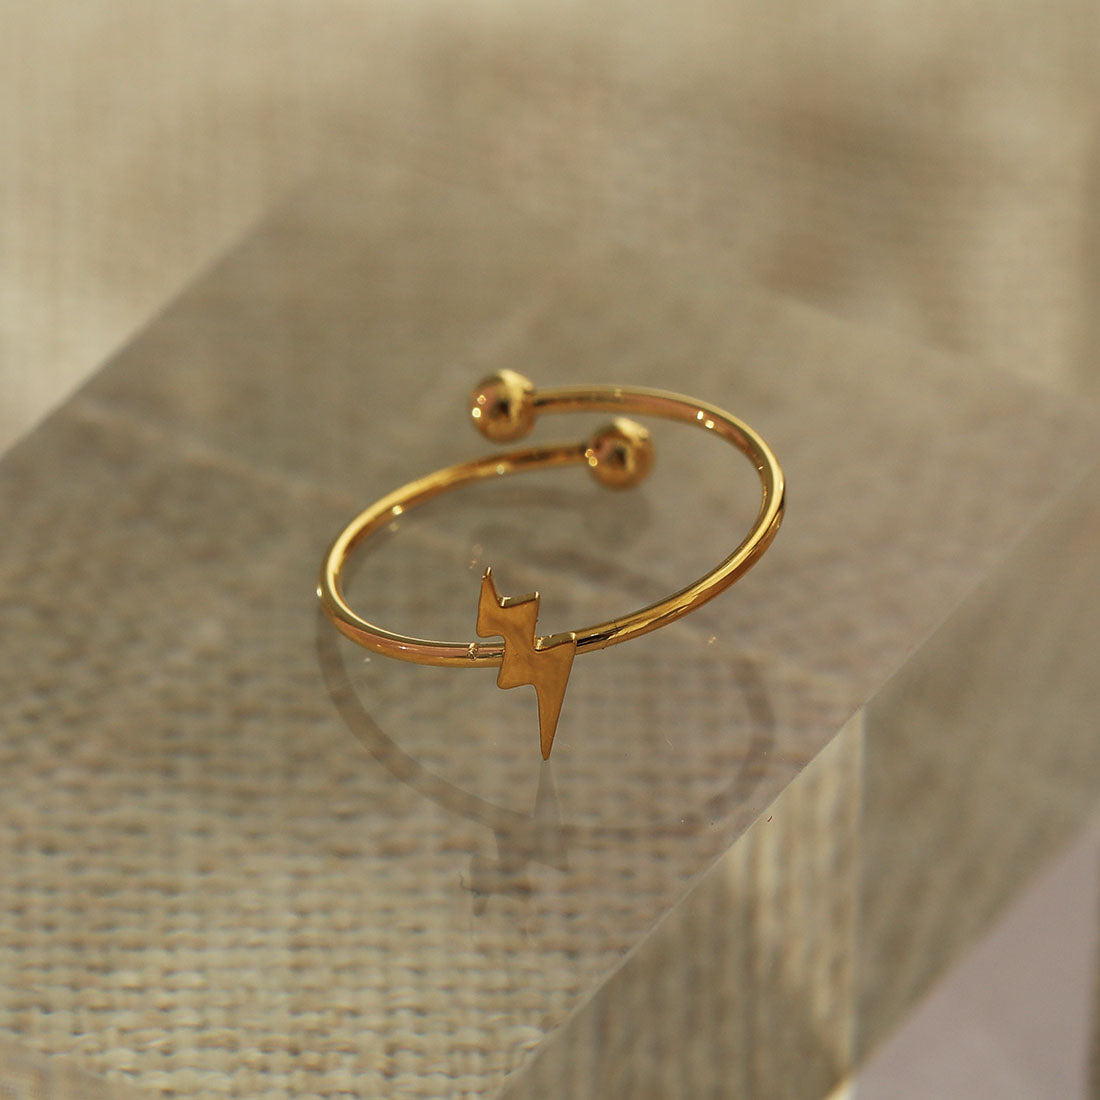 hackney_nine | hackneynine | LAZAR21121_ring | affordable_jewelry | dainty_jewelry | hackney_nine | hackneynine | stainless_steel_jewelry | 18K_gold_jewelry | gold_dipped_jewelry 